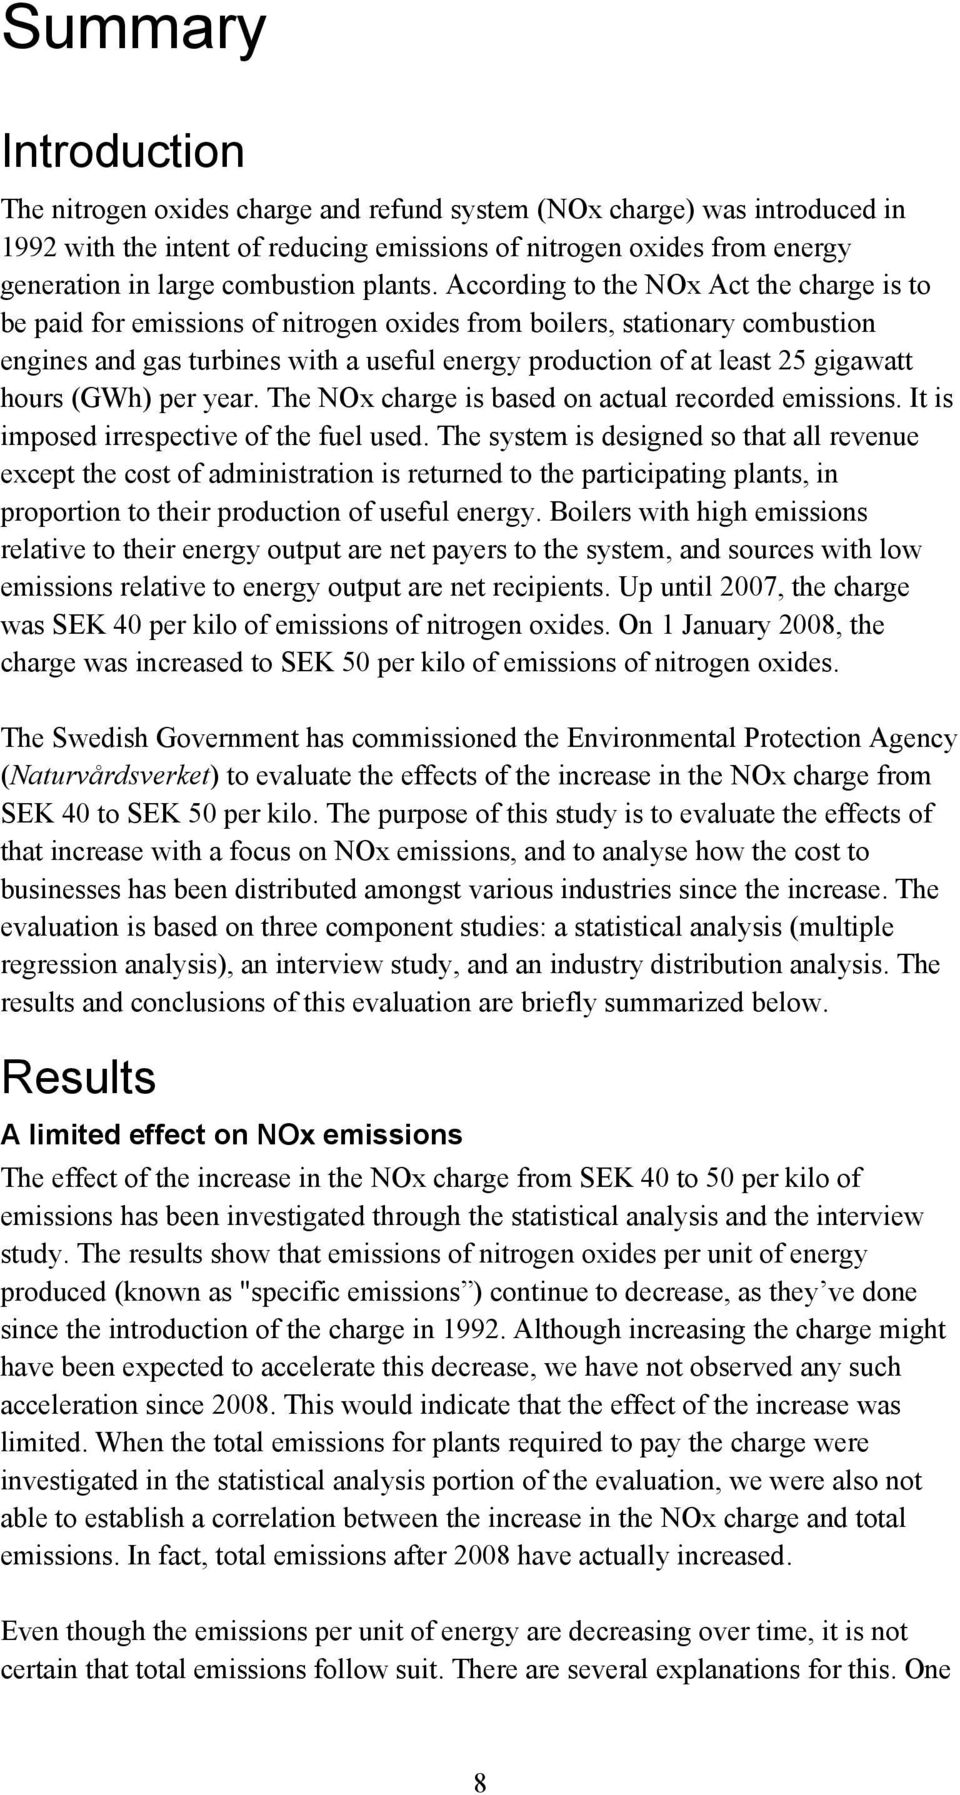 According to the NOx Act the charge is to be paid for emissions of nitrogen oxides from boilers, stationary combustion engines and gas turbines with a useful energy production of at least 25 gigawatt